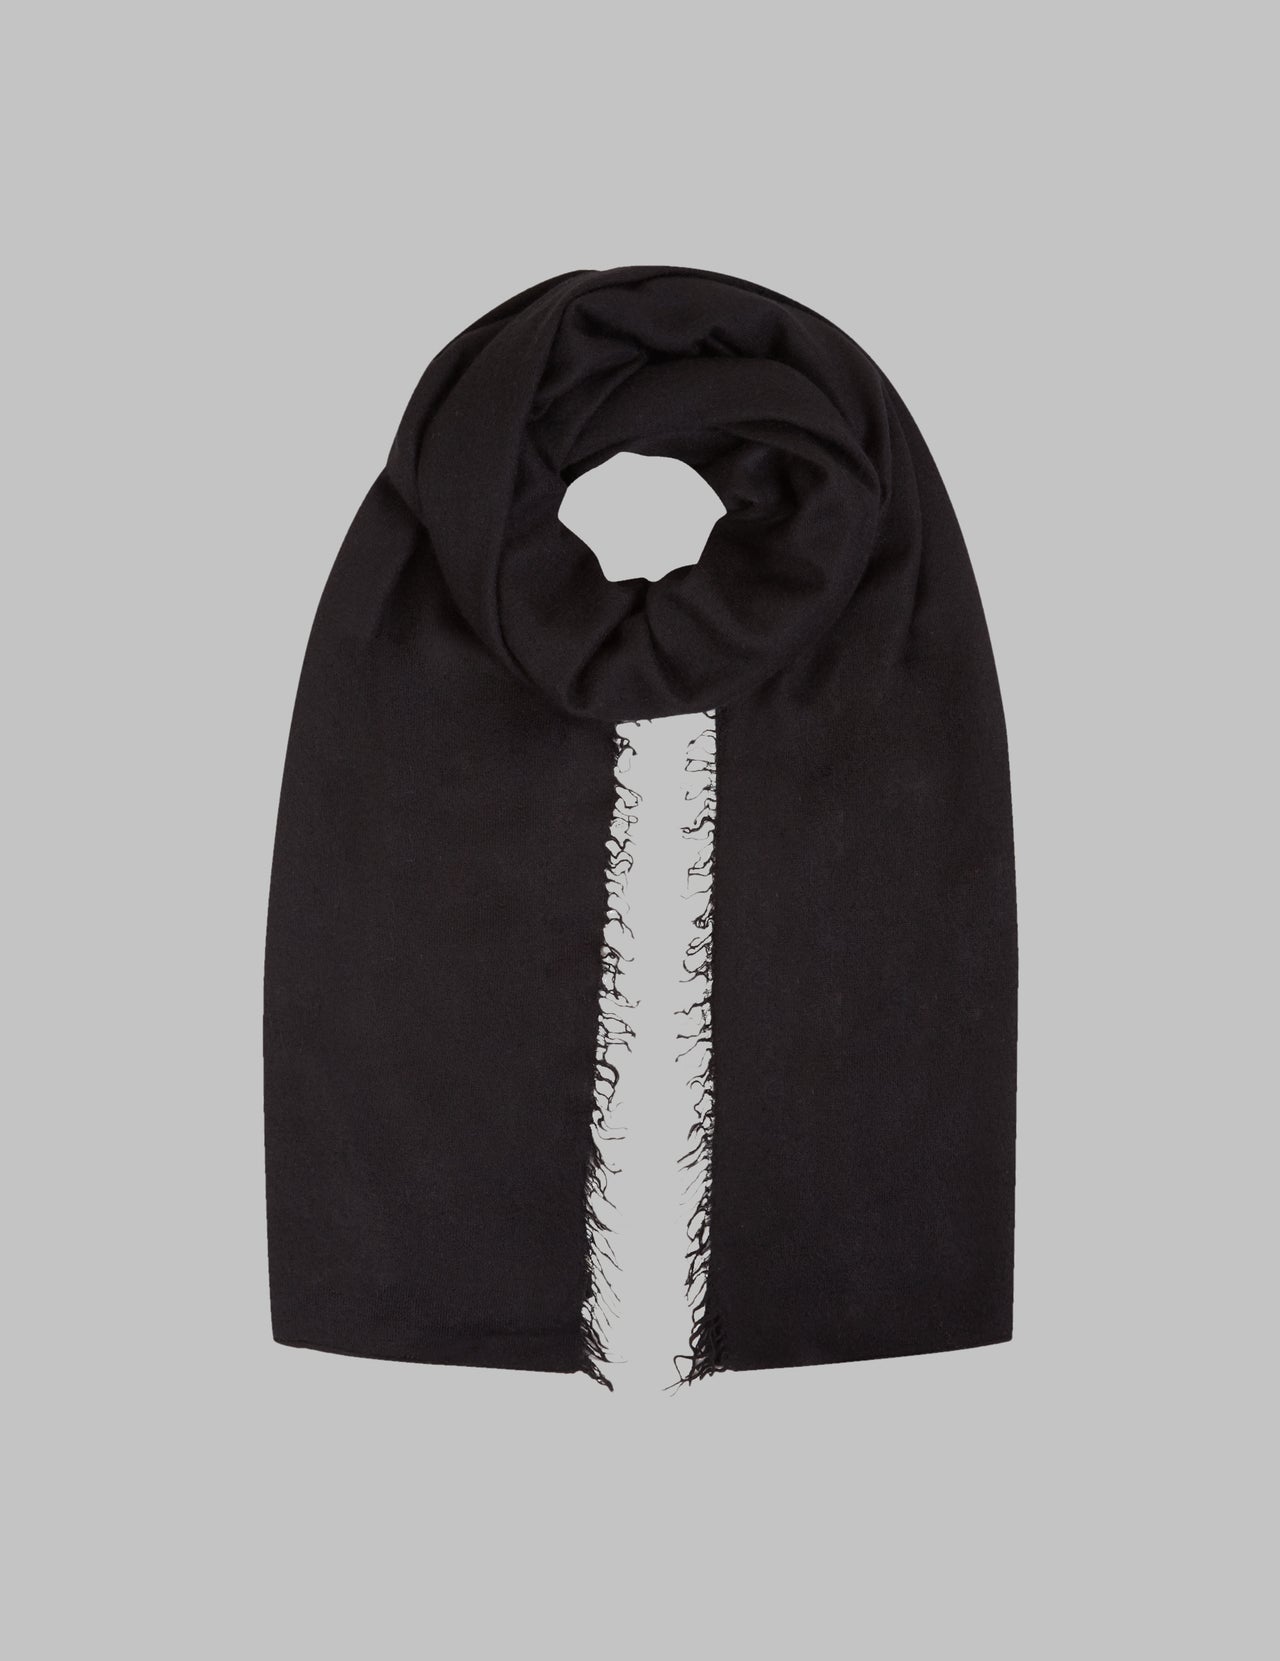  Black Felted Handwoven Cashmere Stole 